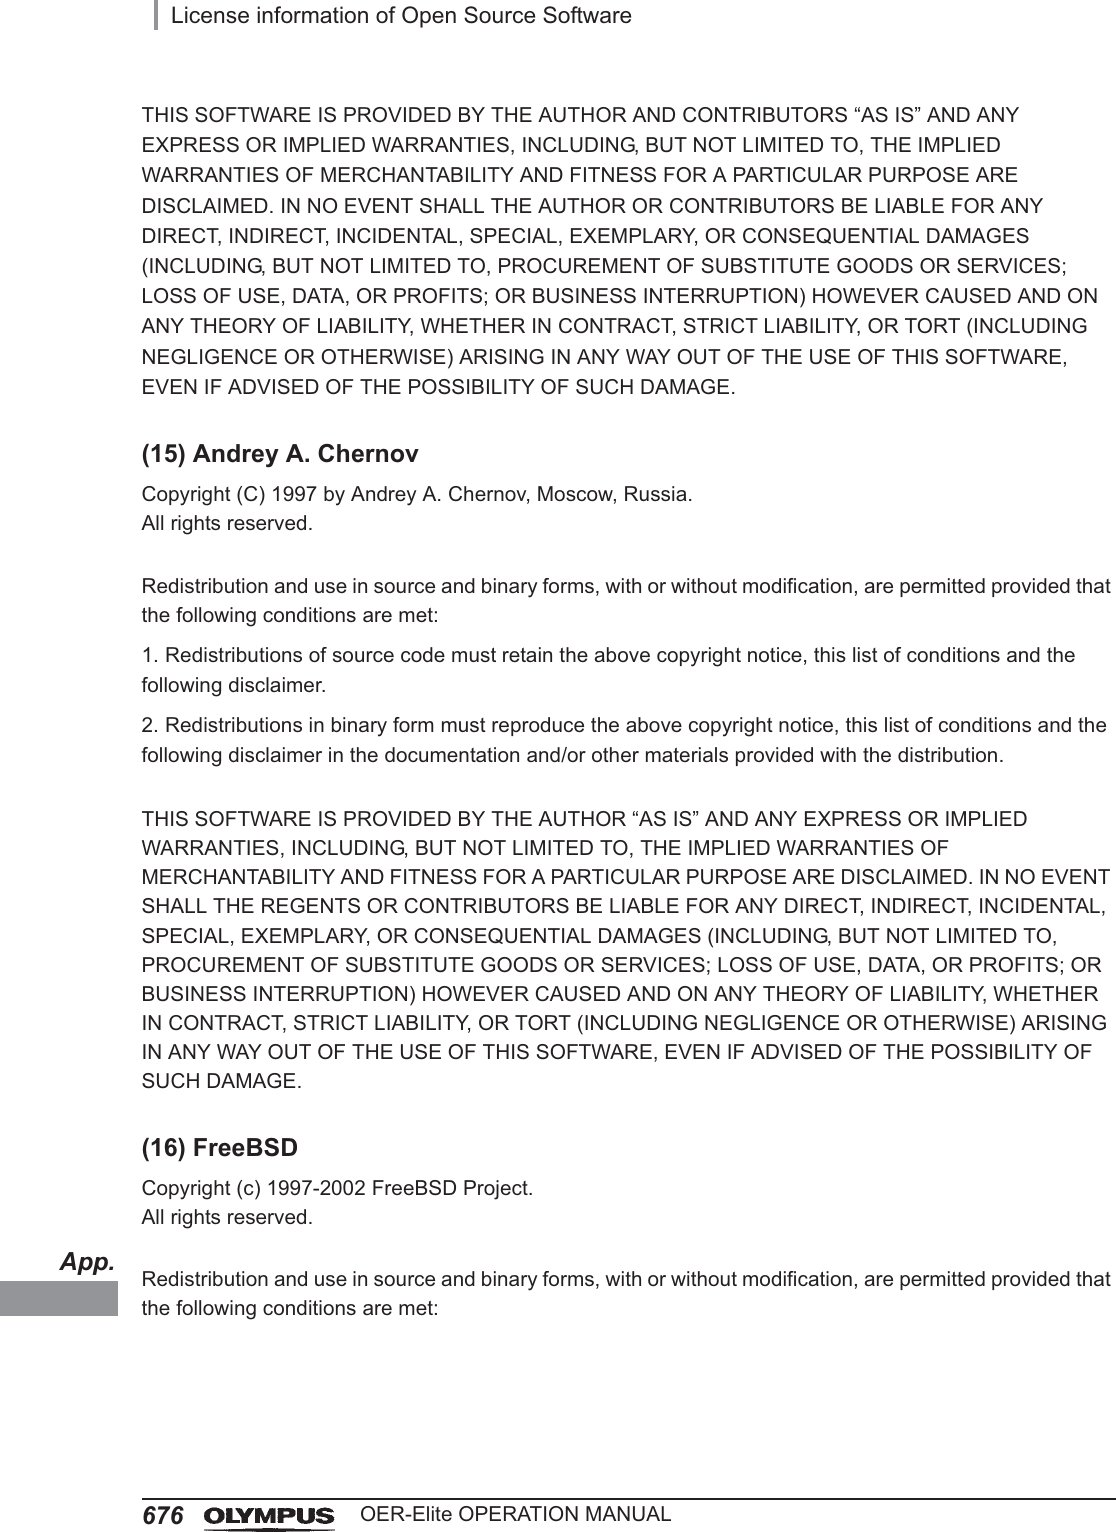 App.676License information of Open Source SoftwareOER-Elite OPERATION MANUALTHIS SOFTWARE IS PROVIDED BY THE AUTHOR AND CONTRIBUTORS “AS IS” AND ANY EXPRESS OR IMPLIED WARRANTIES, INCLUDING, BUT NOT LIMITED TO, THE IMPLIED WARRANTIES OF MERCHANTABILITY AND FITNESS FOR A PARTICULAR PURPOSE ARE DISCLAIMED. IN NO EVENT SHALL THE AUTHOR OR CONTRIBUTORS BE LIABLE FOR ANY DIRECT, INDIRECT, INCIDENTAL, SPECIAL, EXEMPLARY, OR CONSEQUENTIAL DAMAGES (INCLUDING, BUT NOT LIMITED TO, PROCUREMENT OF SUBSTITUTE GOODS OR SERVICES; LOSS OF USE, DATA, OR PROFITS; OR BUSINESS INTERRUPTION) HOWEVER CAUSED AND ON ANY THEORY OF LIABILITY, WHETHER IN CONTRACT, STRICT LIABILITY, OR TORT (INCLUDING NEGLIGENCE OR OTHERWISE) ARISING IN ANY WAY OUT OF THE USE OF THIS SOFTWARE, EVEN IF ADVISED OF THE POSSIBILITY OF SUCH DAMAGE.(15) Andrey A. ChernovCopyright (C) 1997 by Andrey A. Chernov, Moscow, Russia.All rights reserved.Redistribution and use in source and binary forms, with or without modification, are permitted provided that the following conditions are met:1. Redistributions of source code must retain the above copyright notice, this list of conditions and the following disclaimer.2. Redistributions in binary form must reproduce the above copyright notice, this list of conditions and the following disclaimer in the documentation and/or other materials provided with the distribution.THIS SOFTWARE IS PROVIDED BY THE AUTHOR “AS IS” AND ANY EXPRESS OR IMPLIED WARRANTIES, INCLUDING, BUT NOT LIMITED TO, THE IMPLIED WARRANTIES OF MERCHANTABILITY AND FITNESS FOR A PARTICULAR PURPOSE ARE DISCLAIMED. IN NO EVENT SHALL THE REGENTS OR CONTRIBUTORS BE LIABLE FOR ANY DIRECT, INDIRECT, INCIDENTAL, SPECIAL, EXEMPLARY, OR CONSEQUENTIAL DAMAGES (INCLUDING, BUT NOT LIMITED TO, PROCUREMENT OF SUBSTITUTE GOODS OR SERVICES; LOSS OF USE, DATA, OR PROFITS; OR BUSINESS INTERRUPTION) HOWEVER CAUSED AND ON ANY THEORY OF LIABILITY, WHETHER IN CONTRACT, STRICT LIABILITY, OR TORT (INCLUDING NEGLIGENCE OR OTHERWISE) ARISING IN ANY WAY OUT OF THE USE OF THIS SOFTWARE, EVEN IF ADVISED OF THE POSSIBILITY OF SUCH DAMAGE.(16) FreeBSDCopyright (c) 1997-2002 FreeBSD Project.All rights reserved.Redistribution and use in source and binary forms, with or without modification, are permitted provided that the following conditions are met: